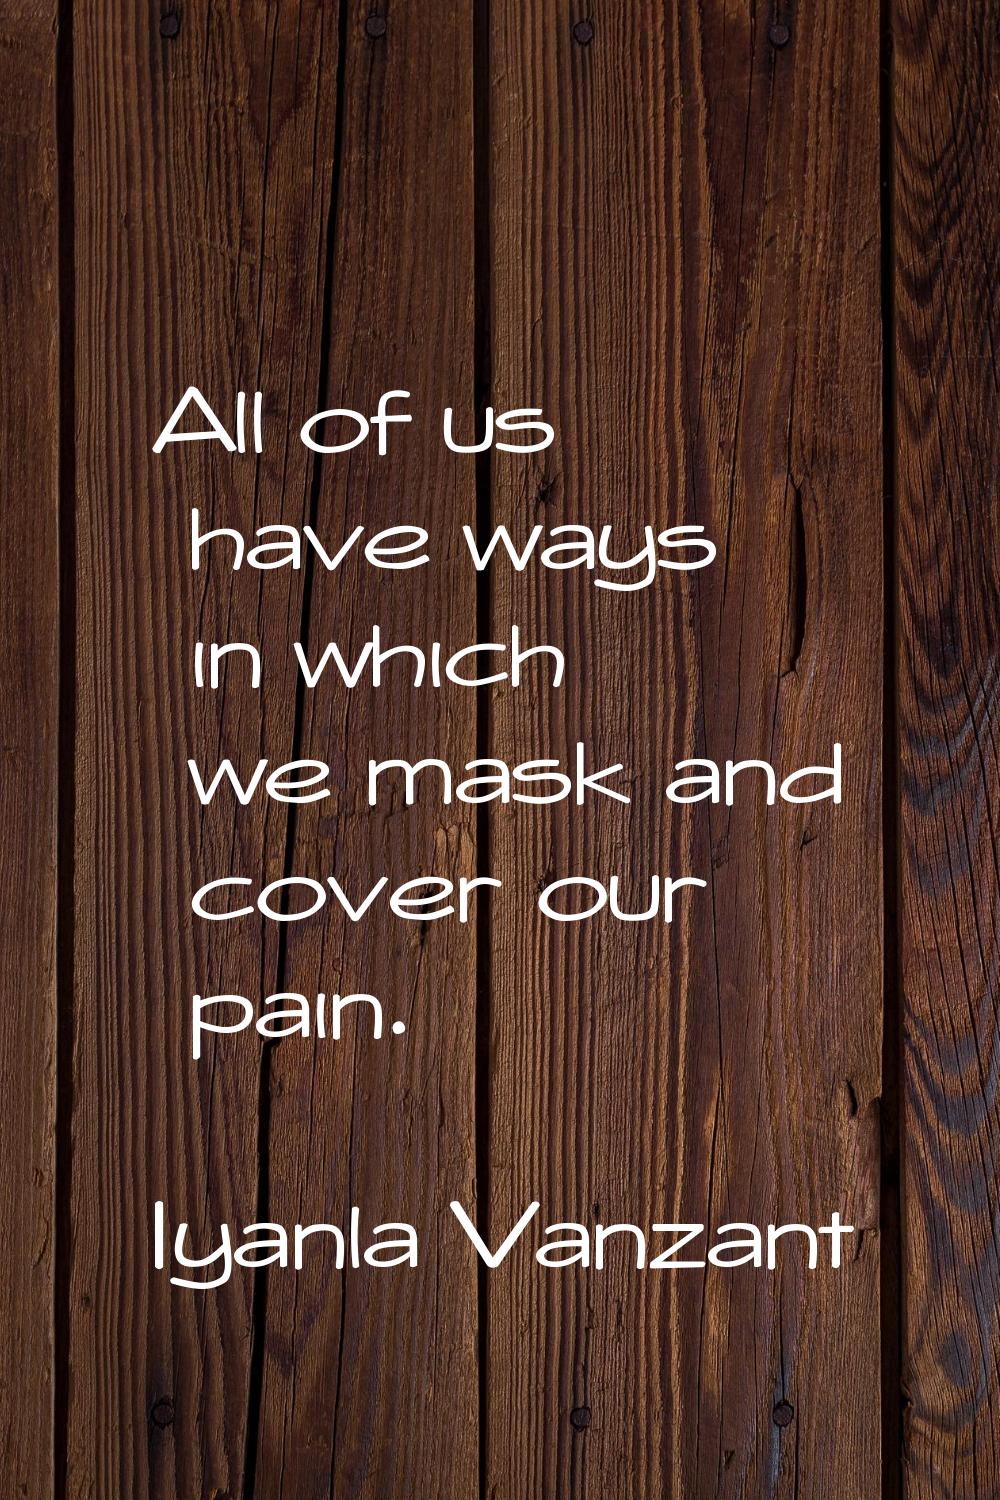 All of us have ways in which we mask and cover our pain.